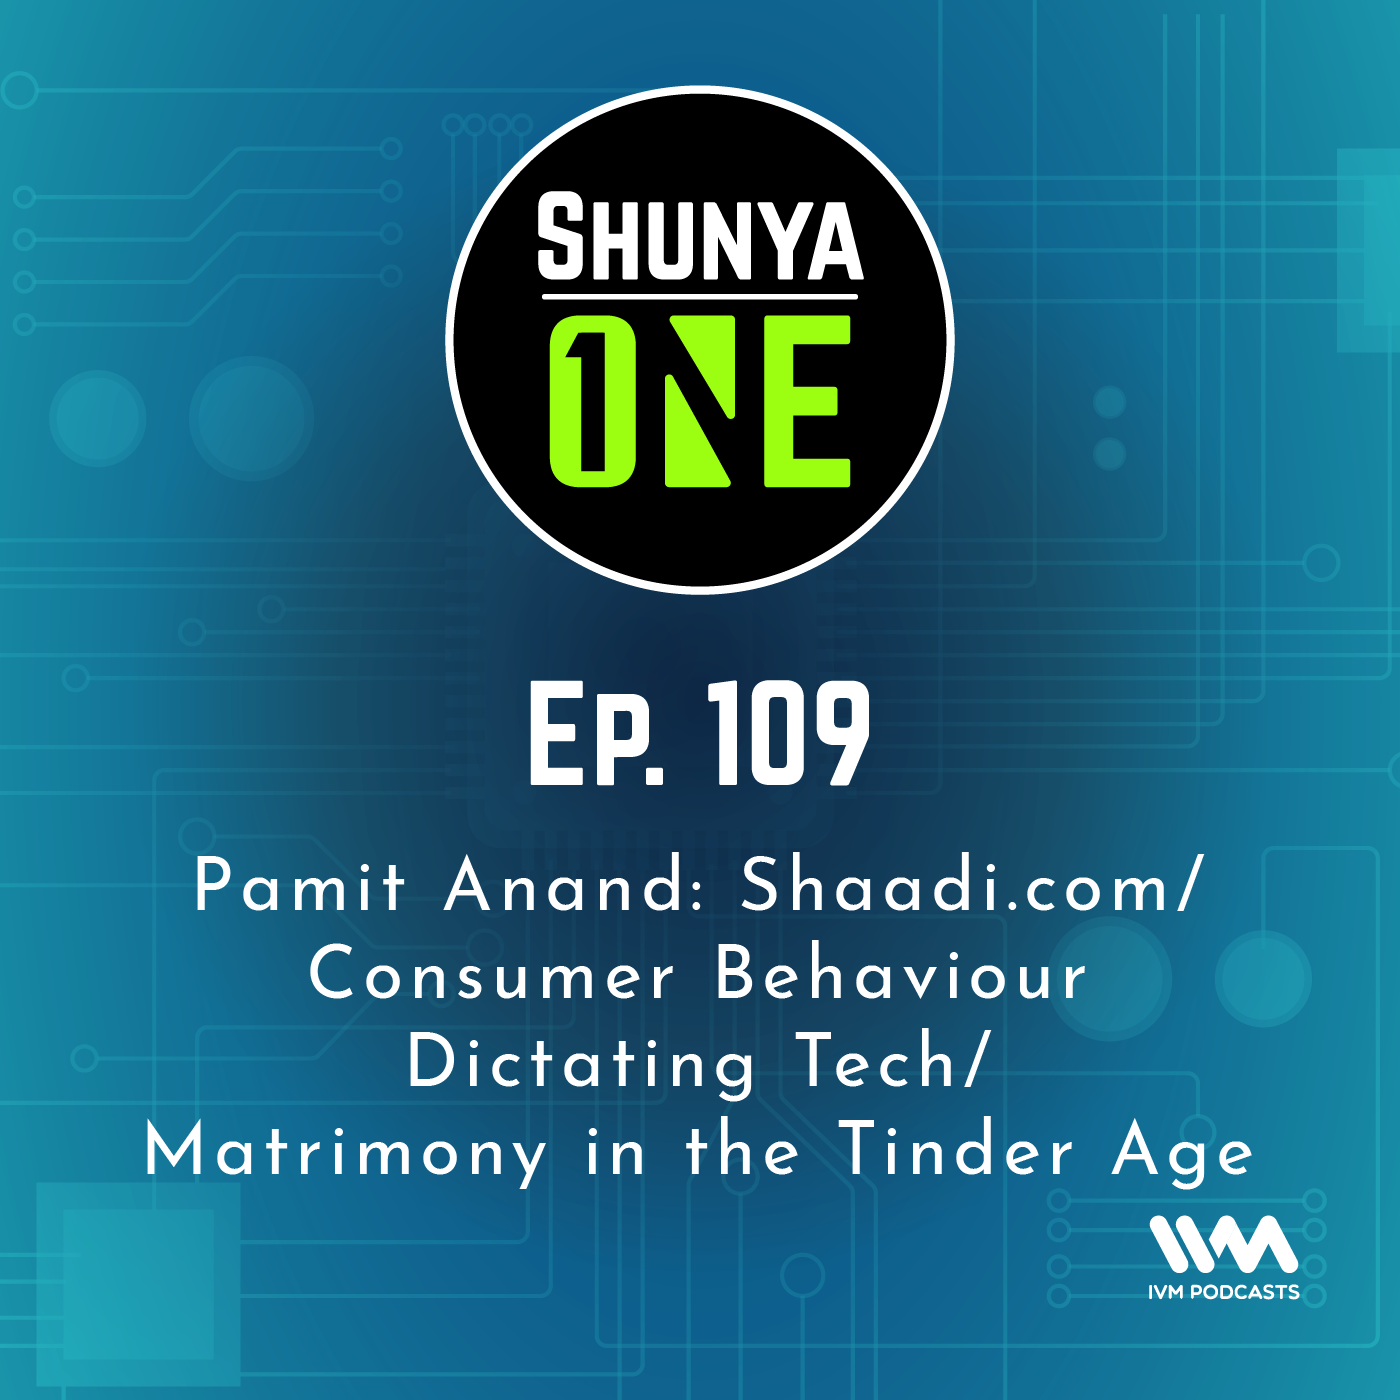 Feat. Pamit Anand: Shaadi.com/ Consumer Behaviour Dictating Tech/ Matrimony in the Tinder Age